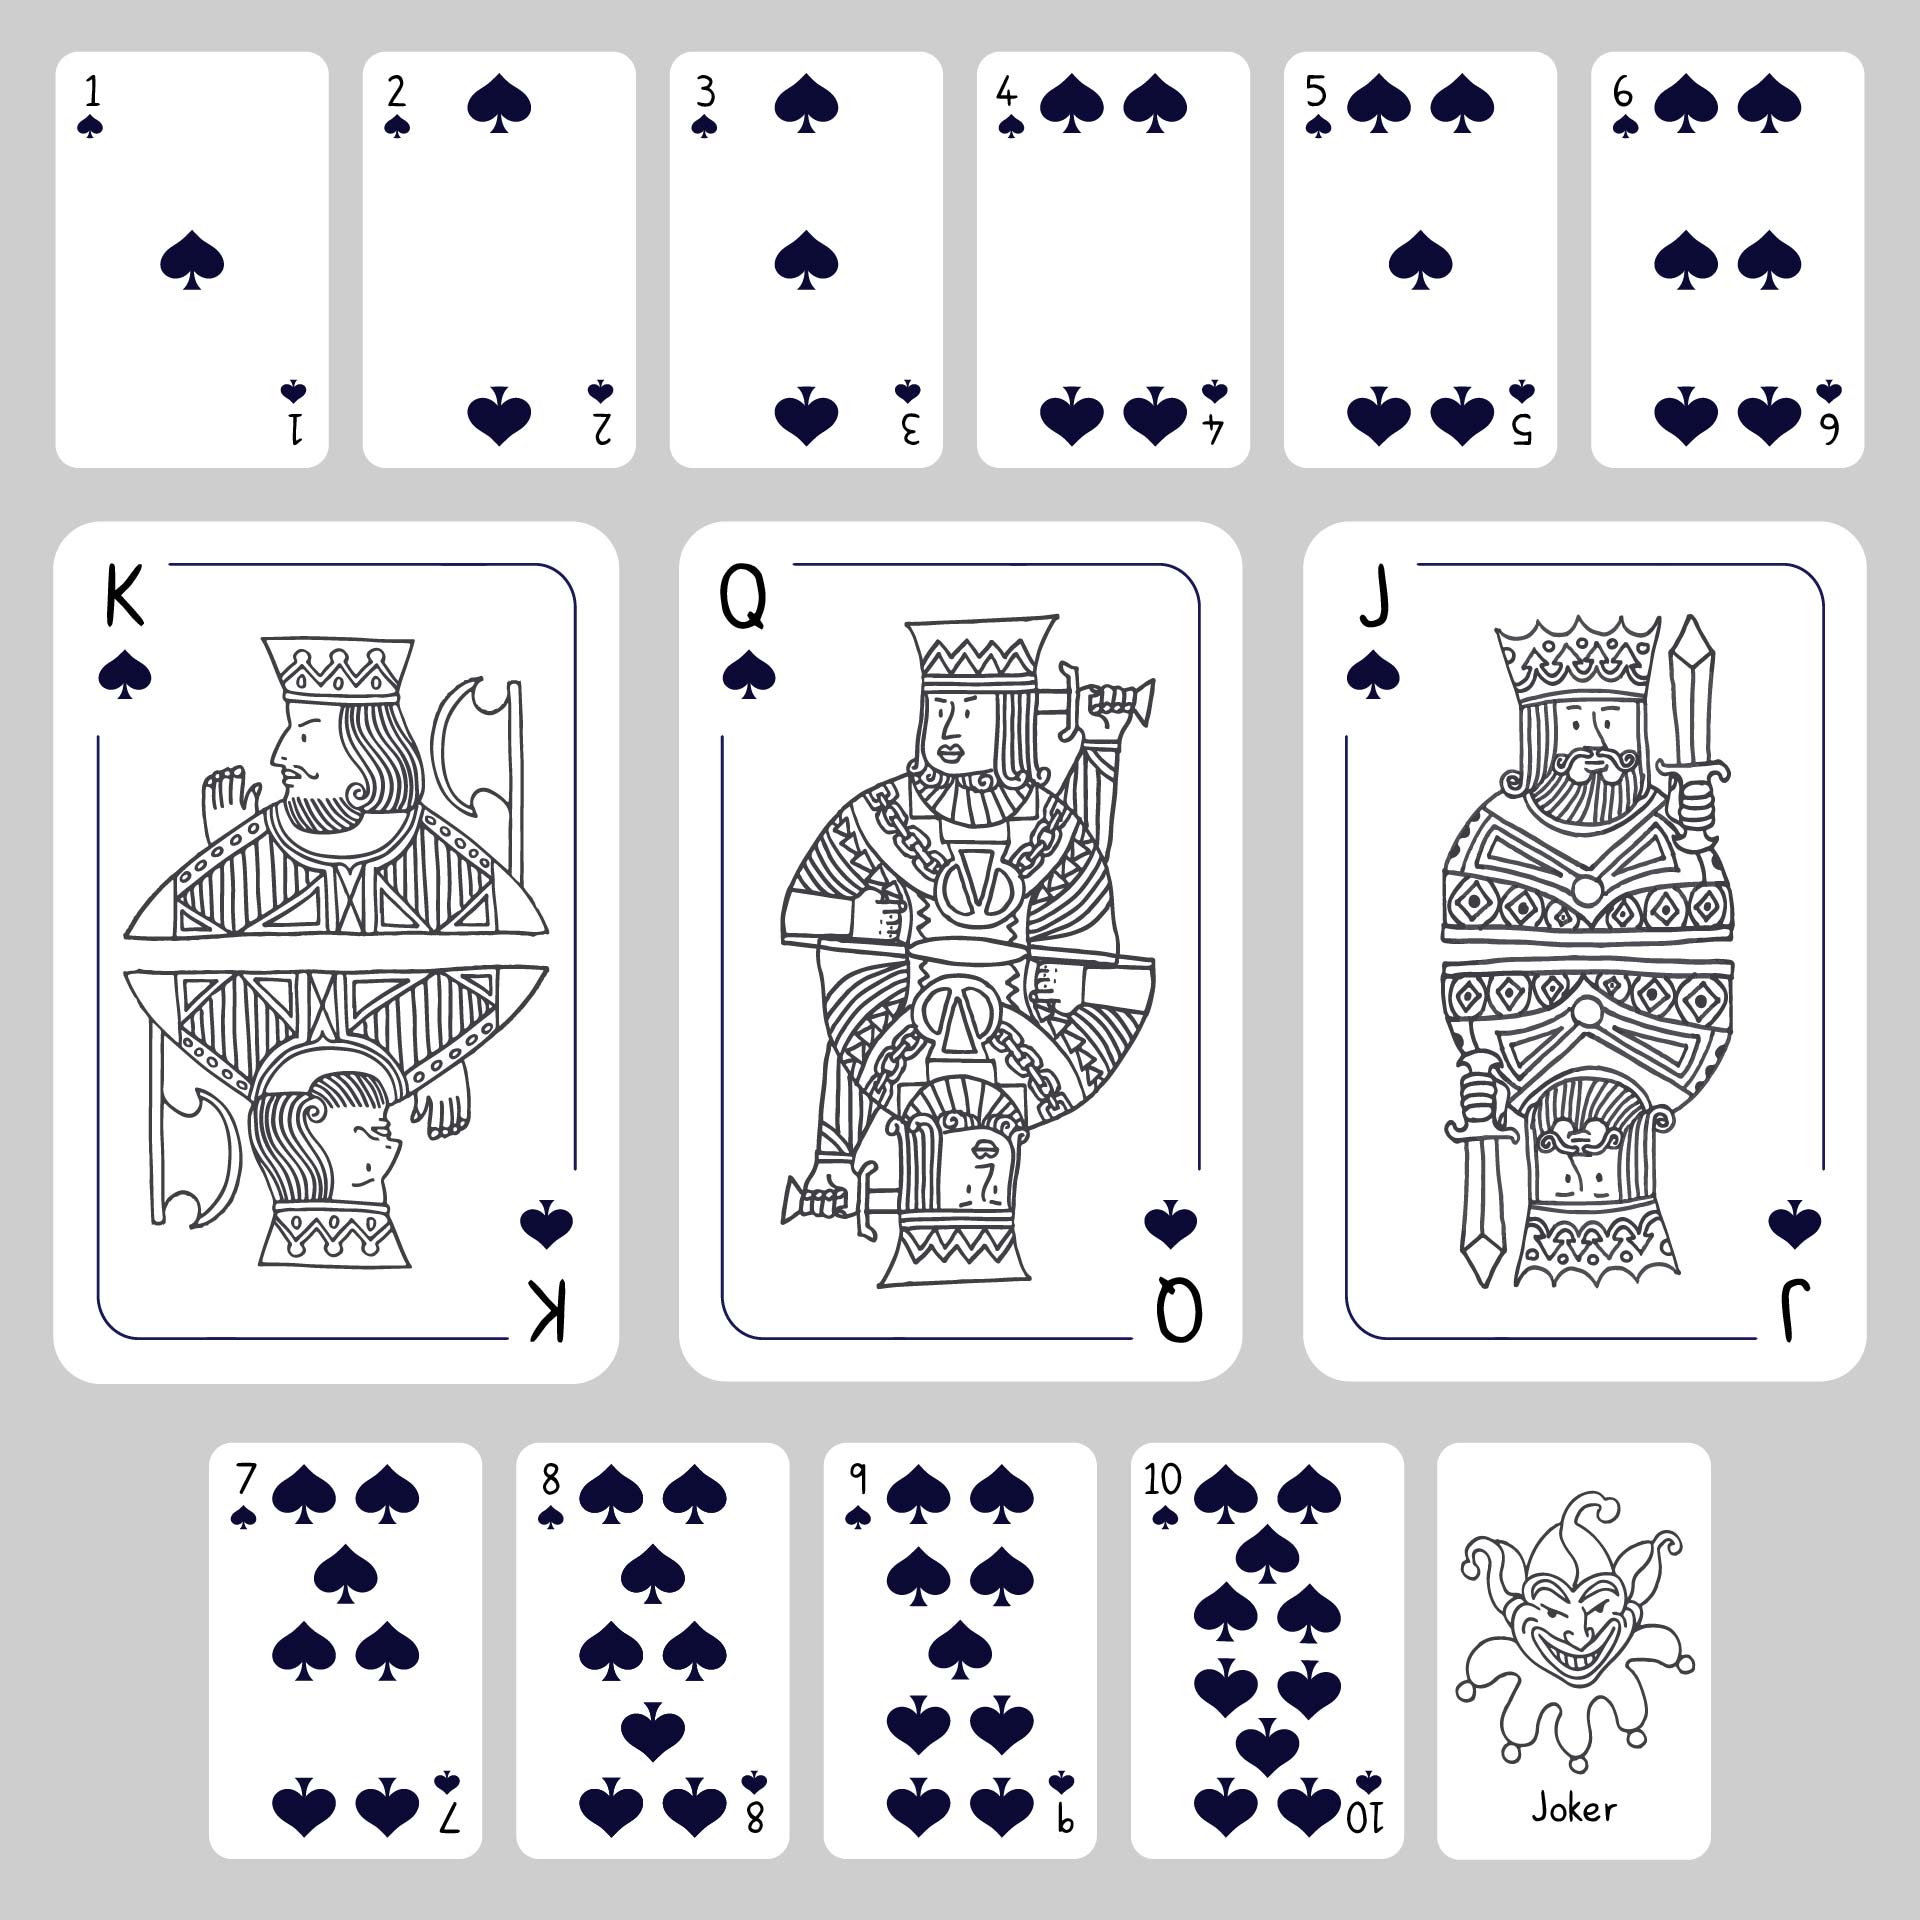 4 Best Images of Deck Of Playing Cards Printable Printable Blank